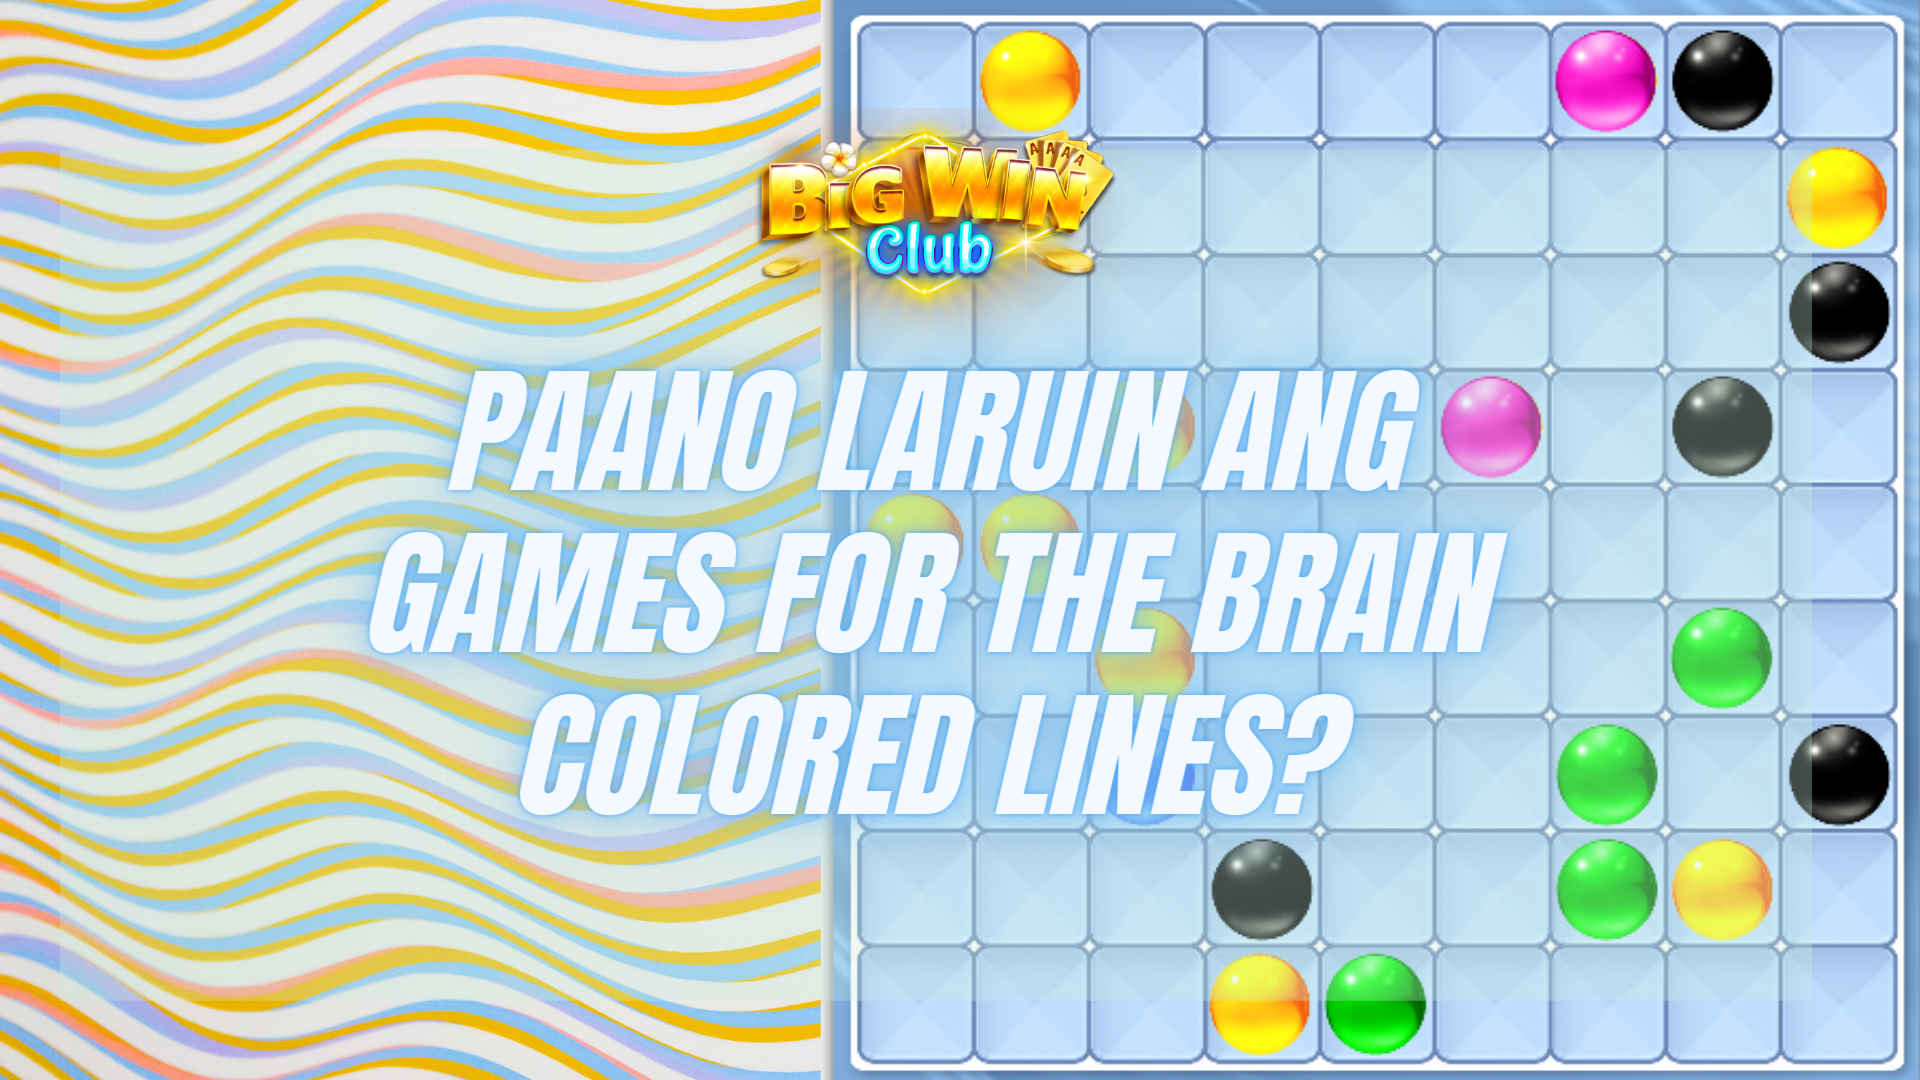 Paano laruin ang games for the brain colored lines?